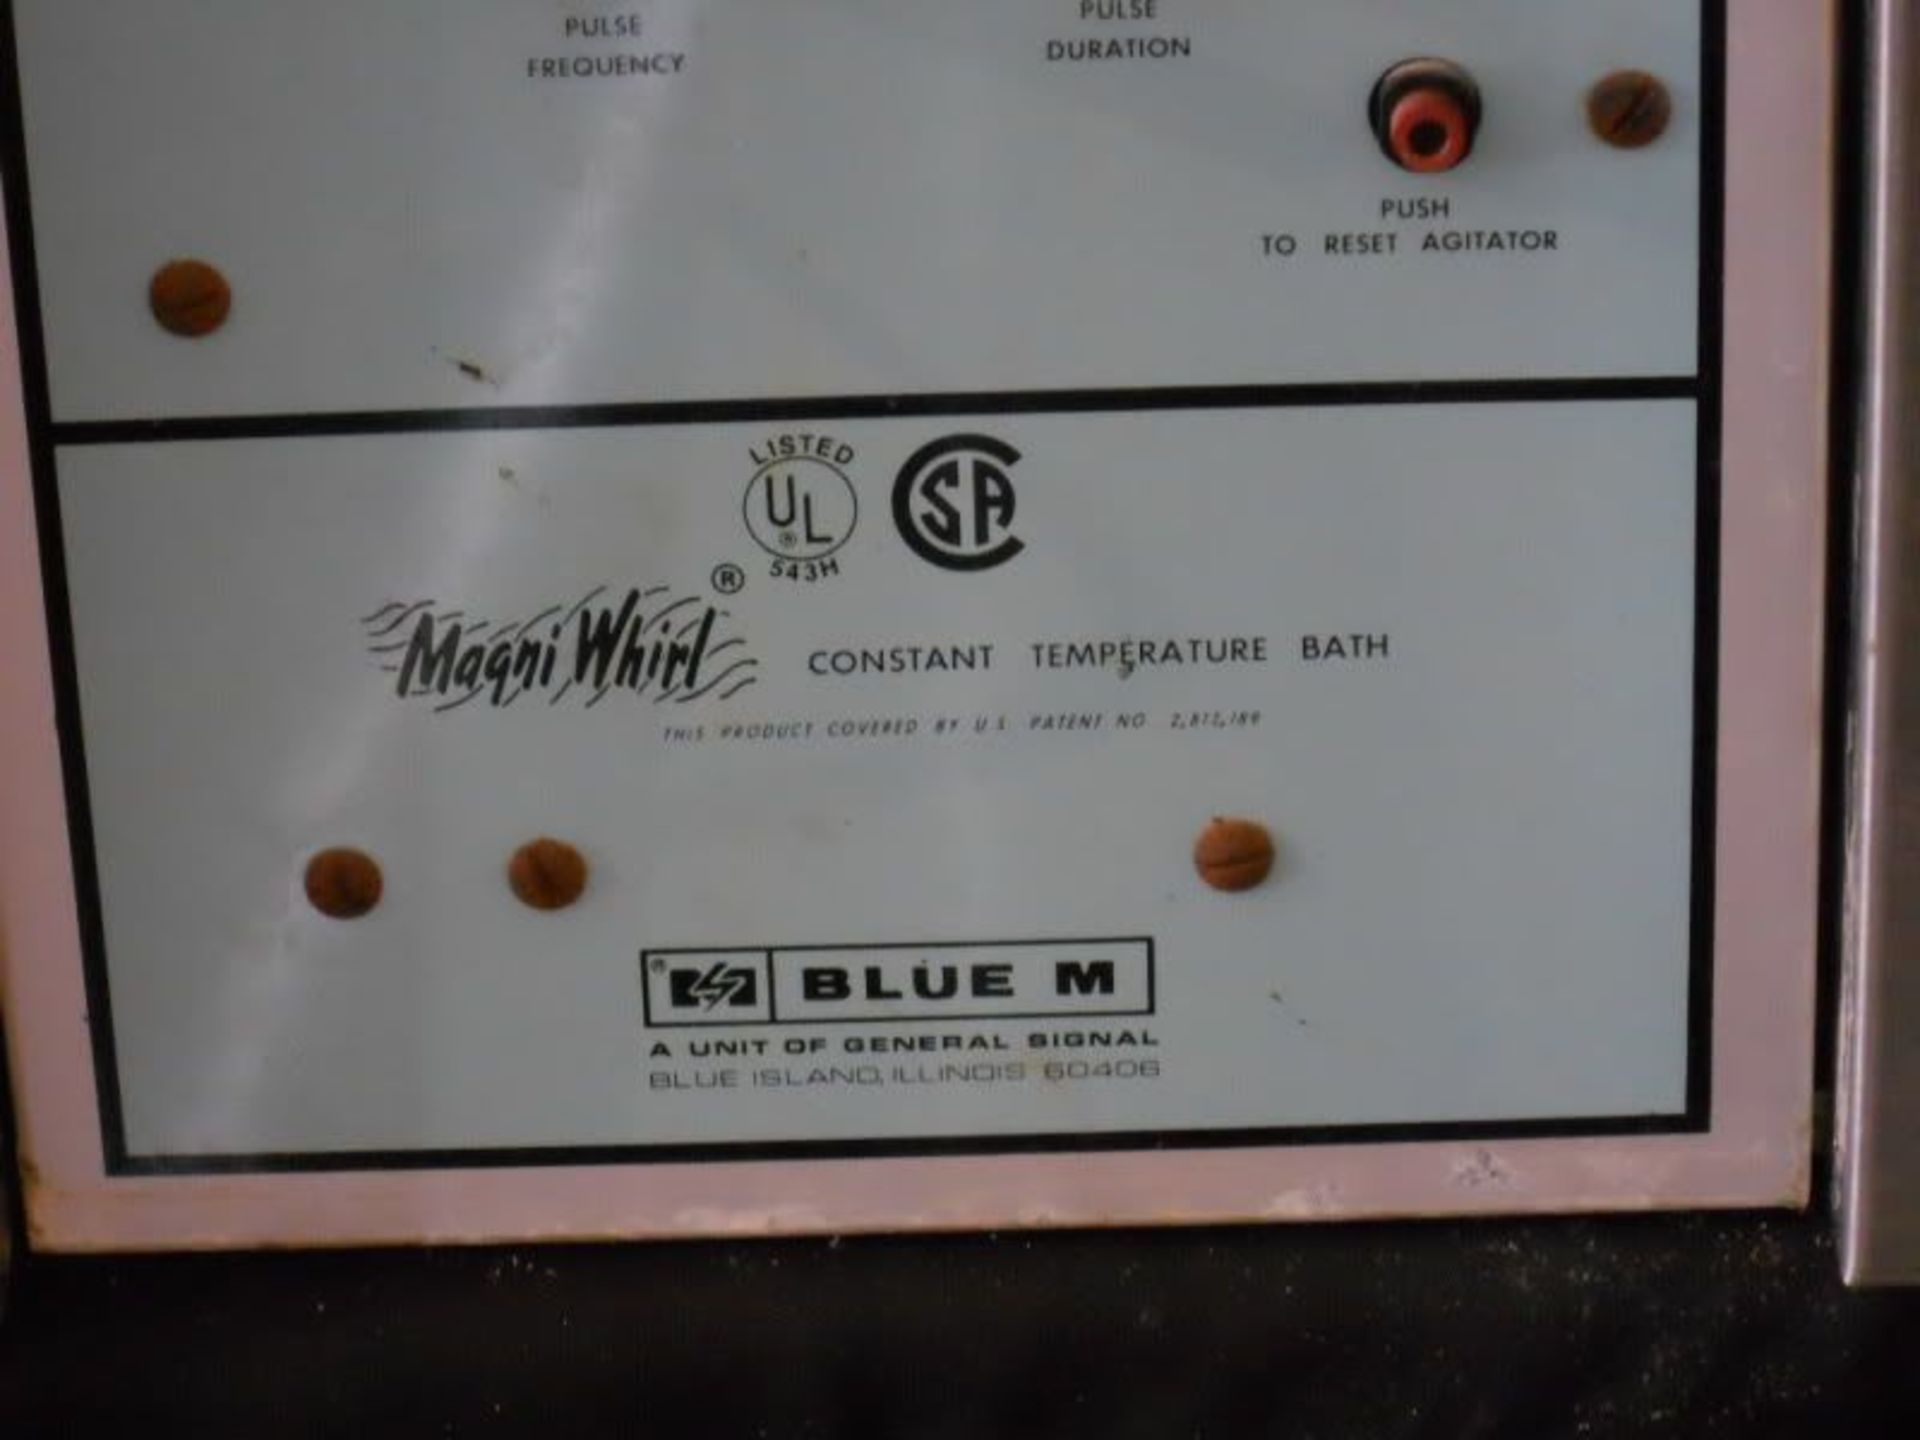 Blue M Magni Whirl Constant Temp. Water Bath MW1110A-1 (Parts), Qty 1, 320895392027 - Image 3 of 8